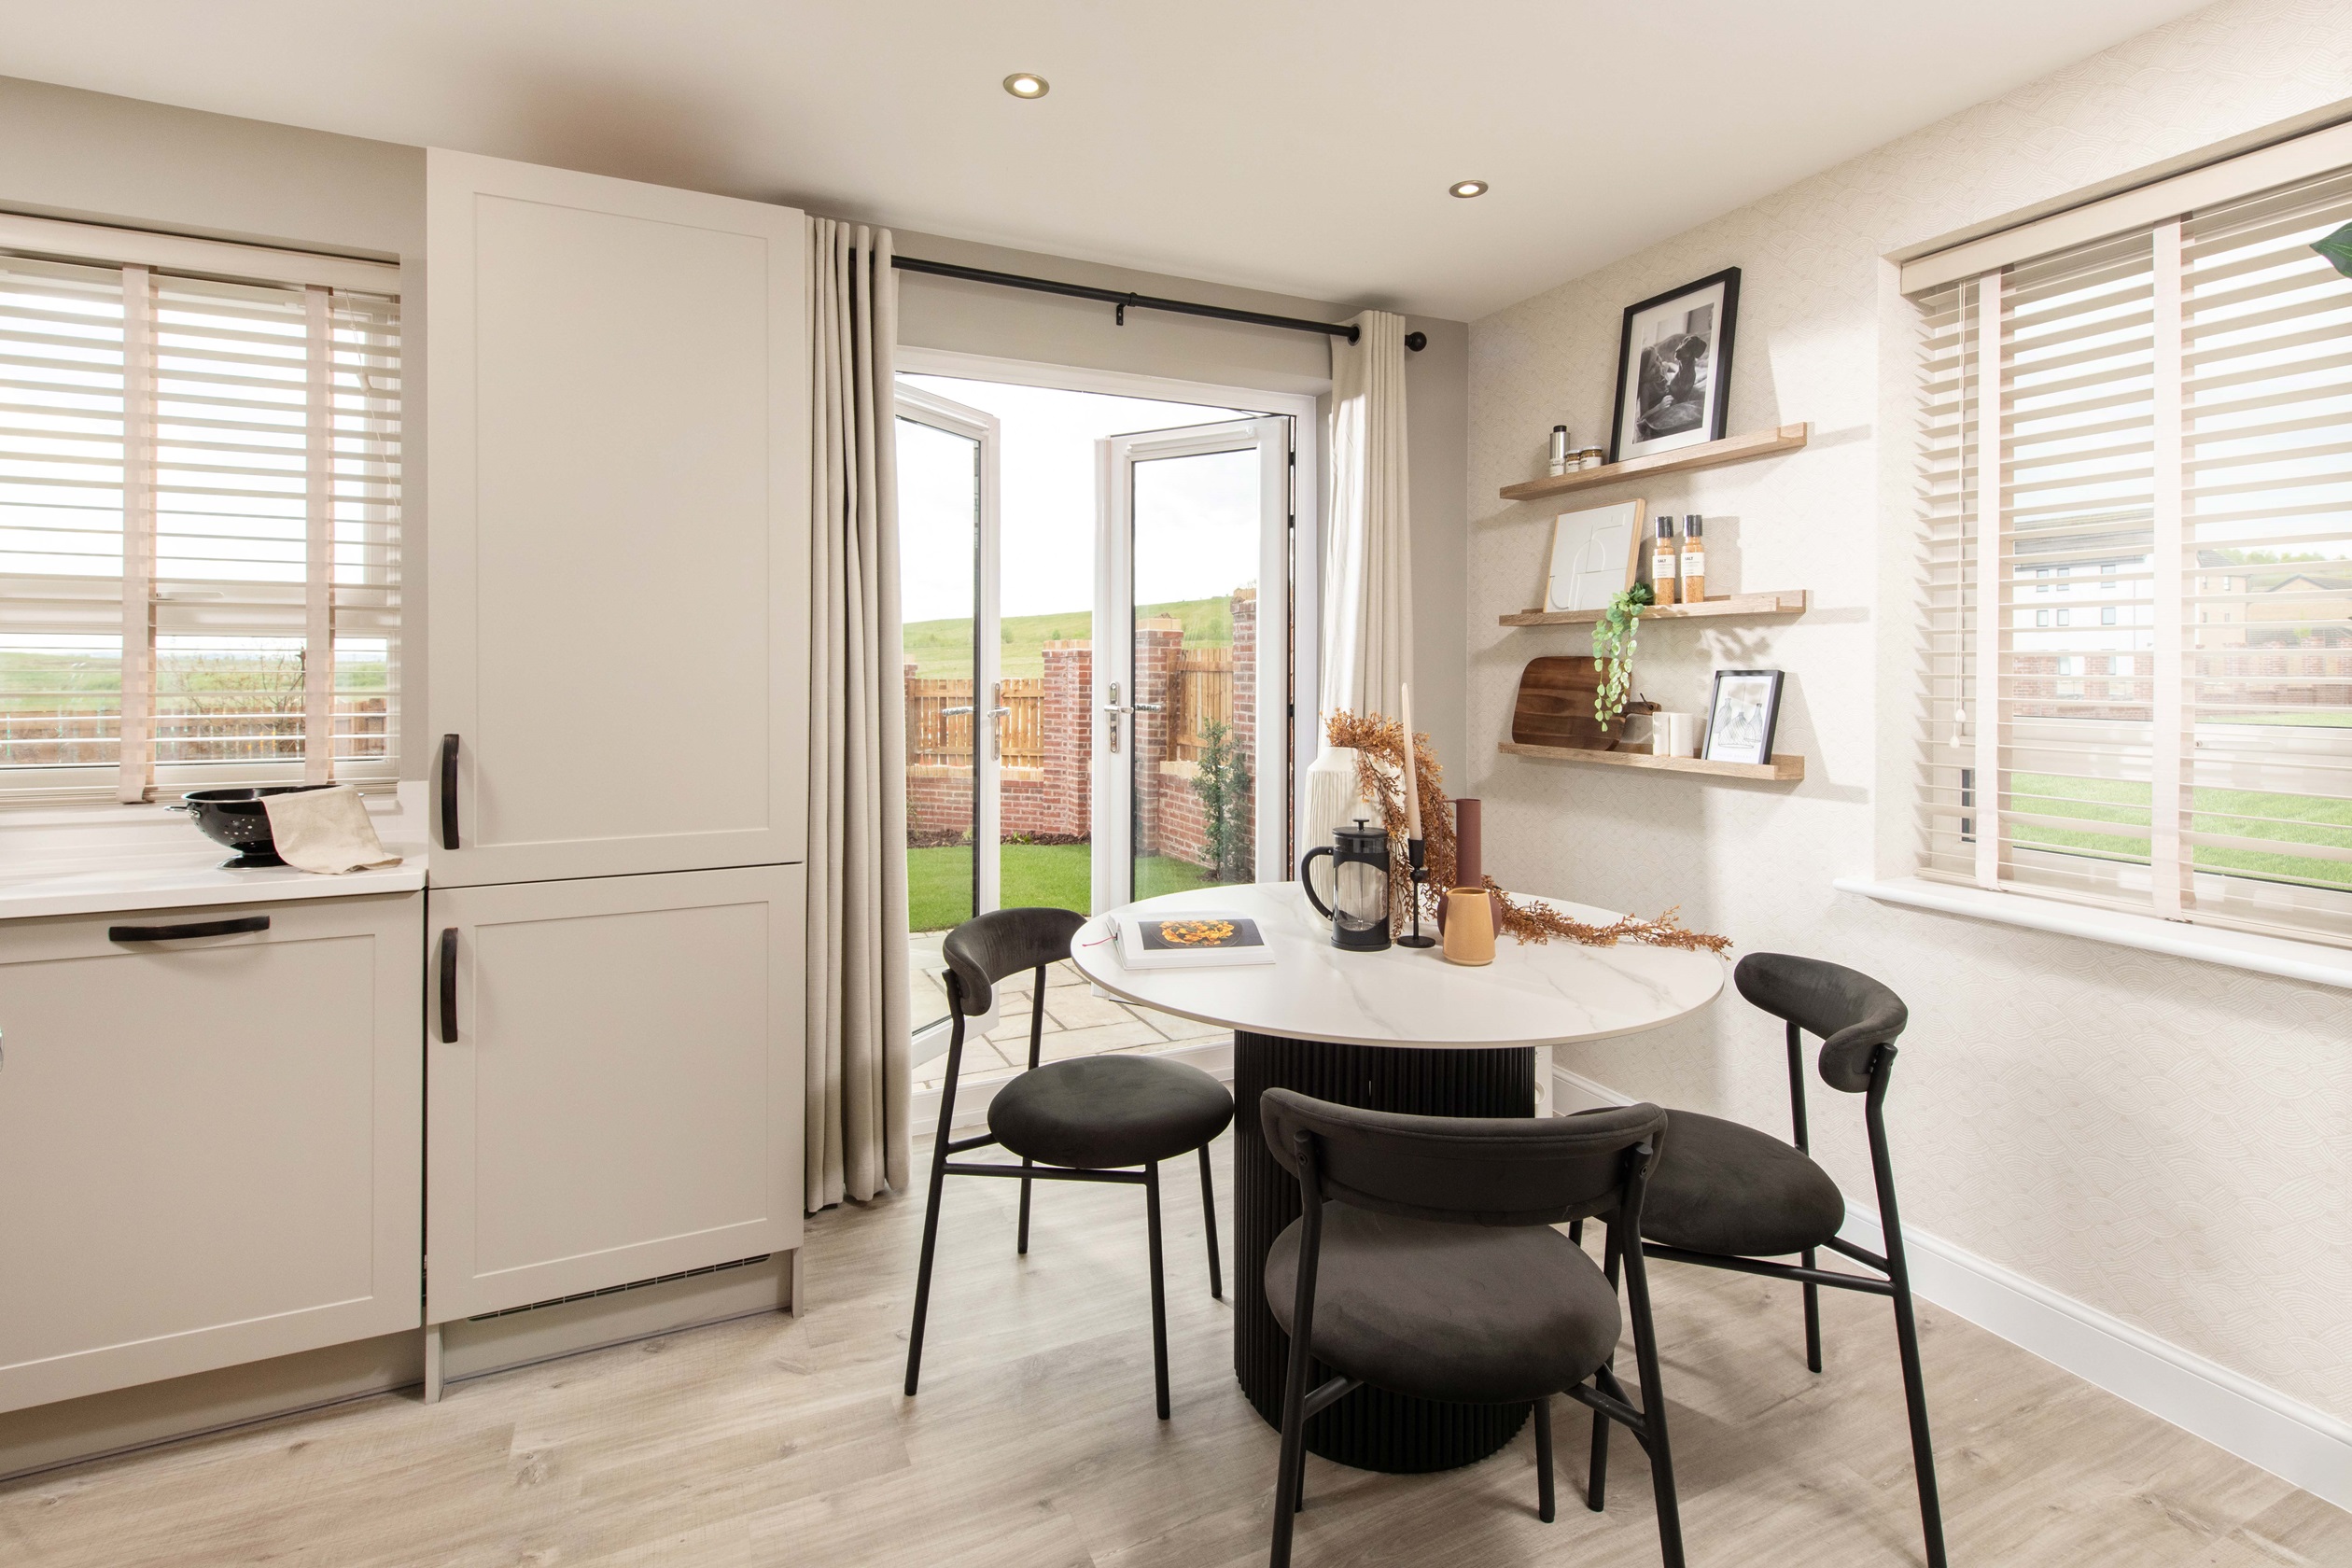 Property 3 of 8. Bar Yw Affinity Moresby Show Home